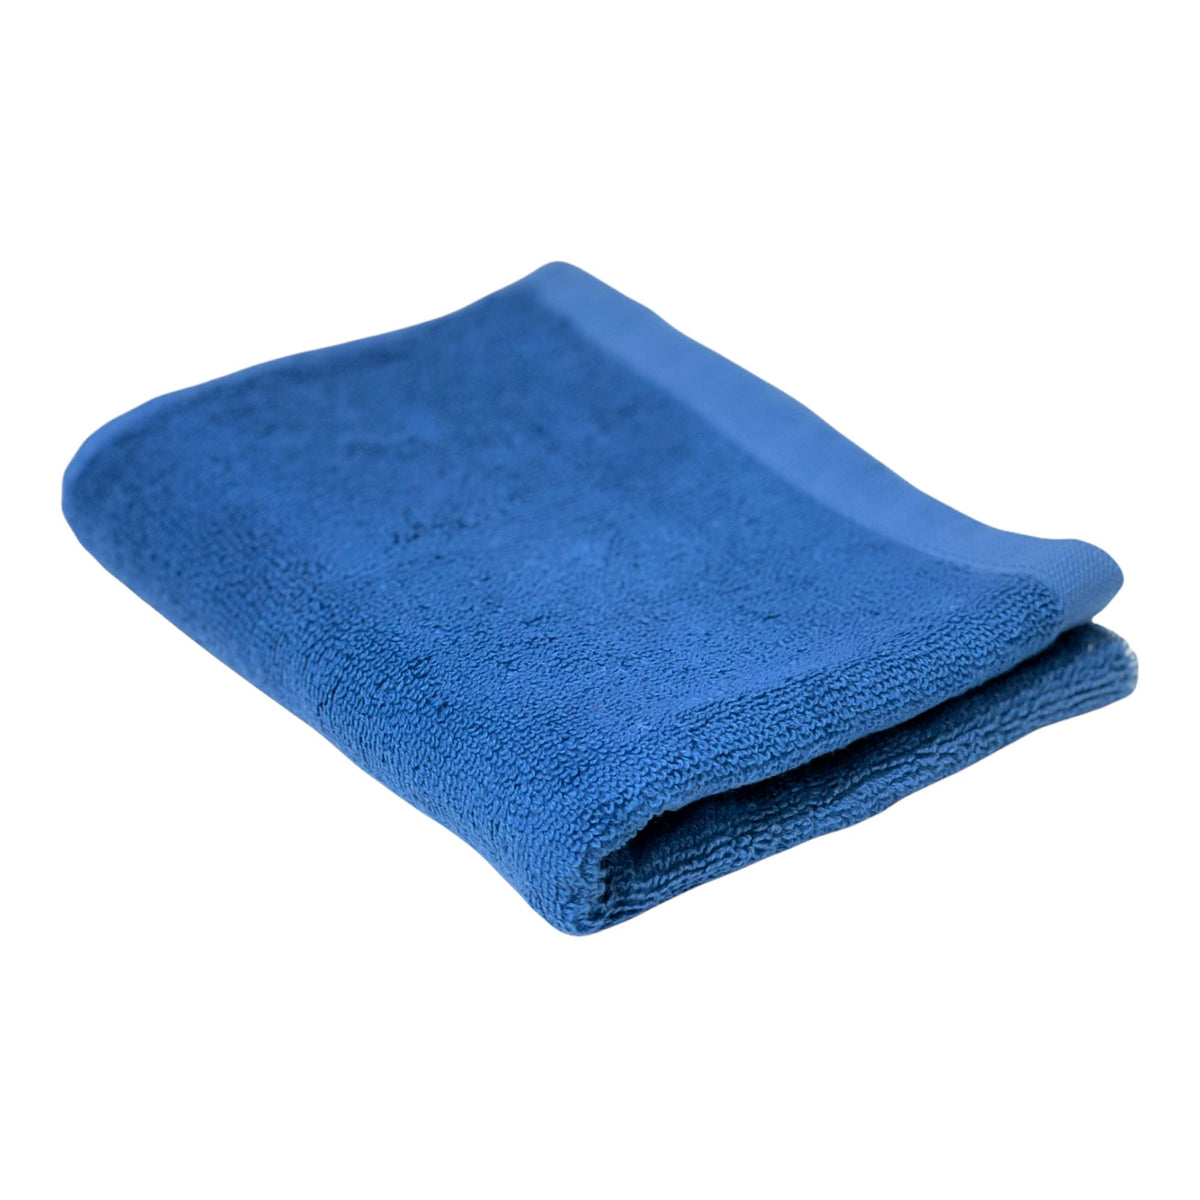 https://www.detailerschoice.com/cdn/shop/products/car-wash-100-cotton-terry-cloth-cleaning-drying-towels-16-x-25-cotton-towel-golden-state-trading-inc-1-piece-blue-540301_1200x1200.jpg?v=1668740542